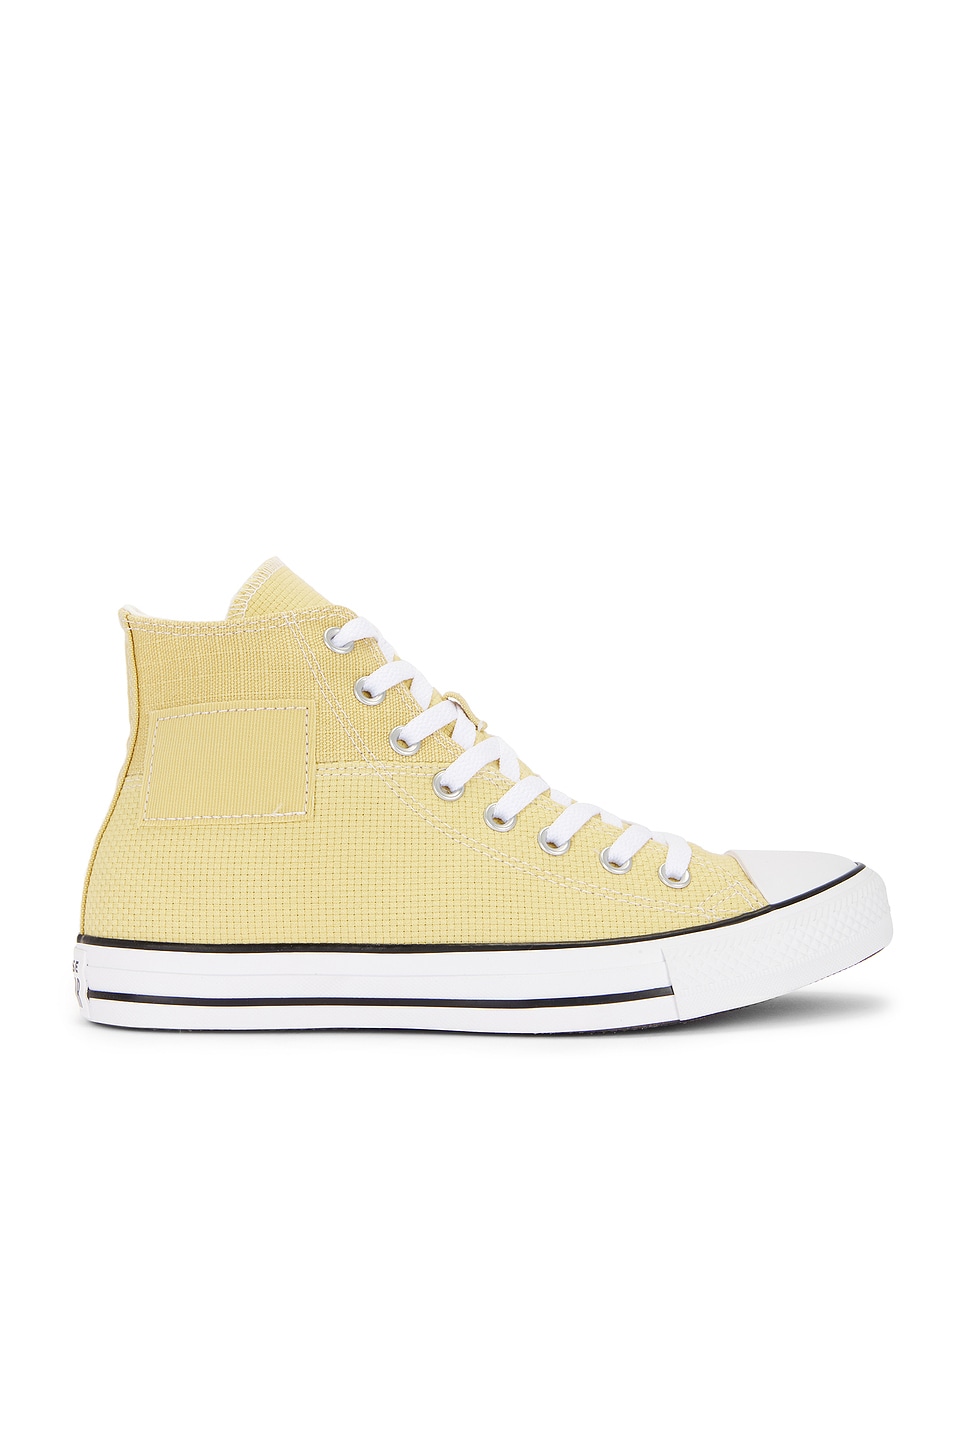 Image 1 of Converse Chuck Taylor All Star Canvas & Jacquard in Utility Sunflower, Black, & Egret